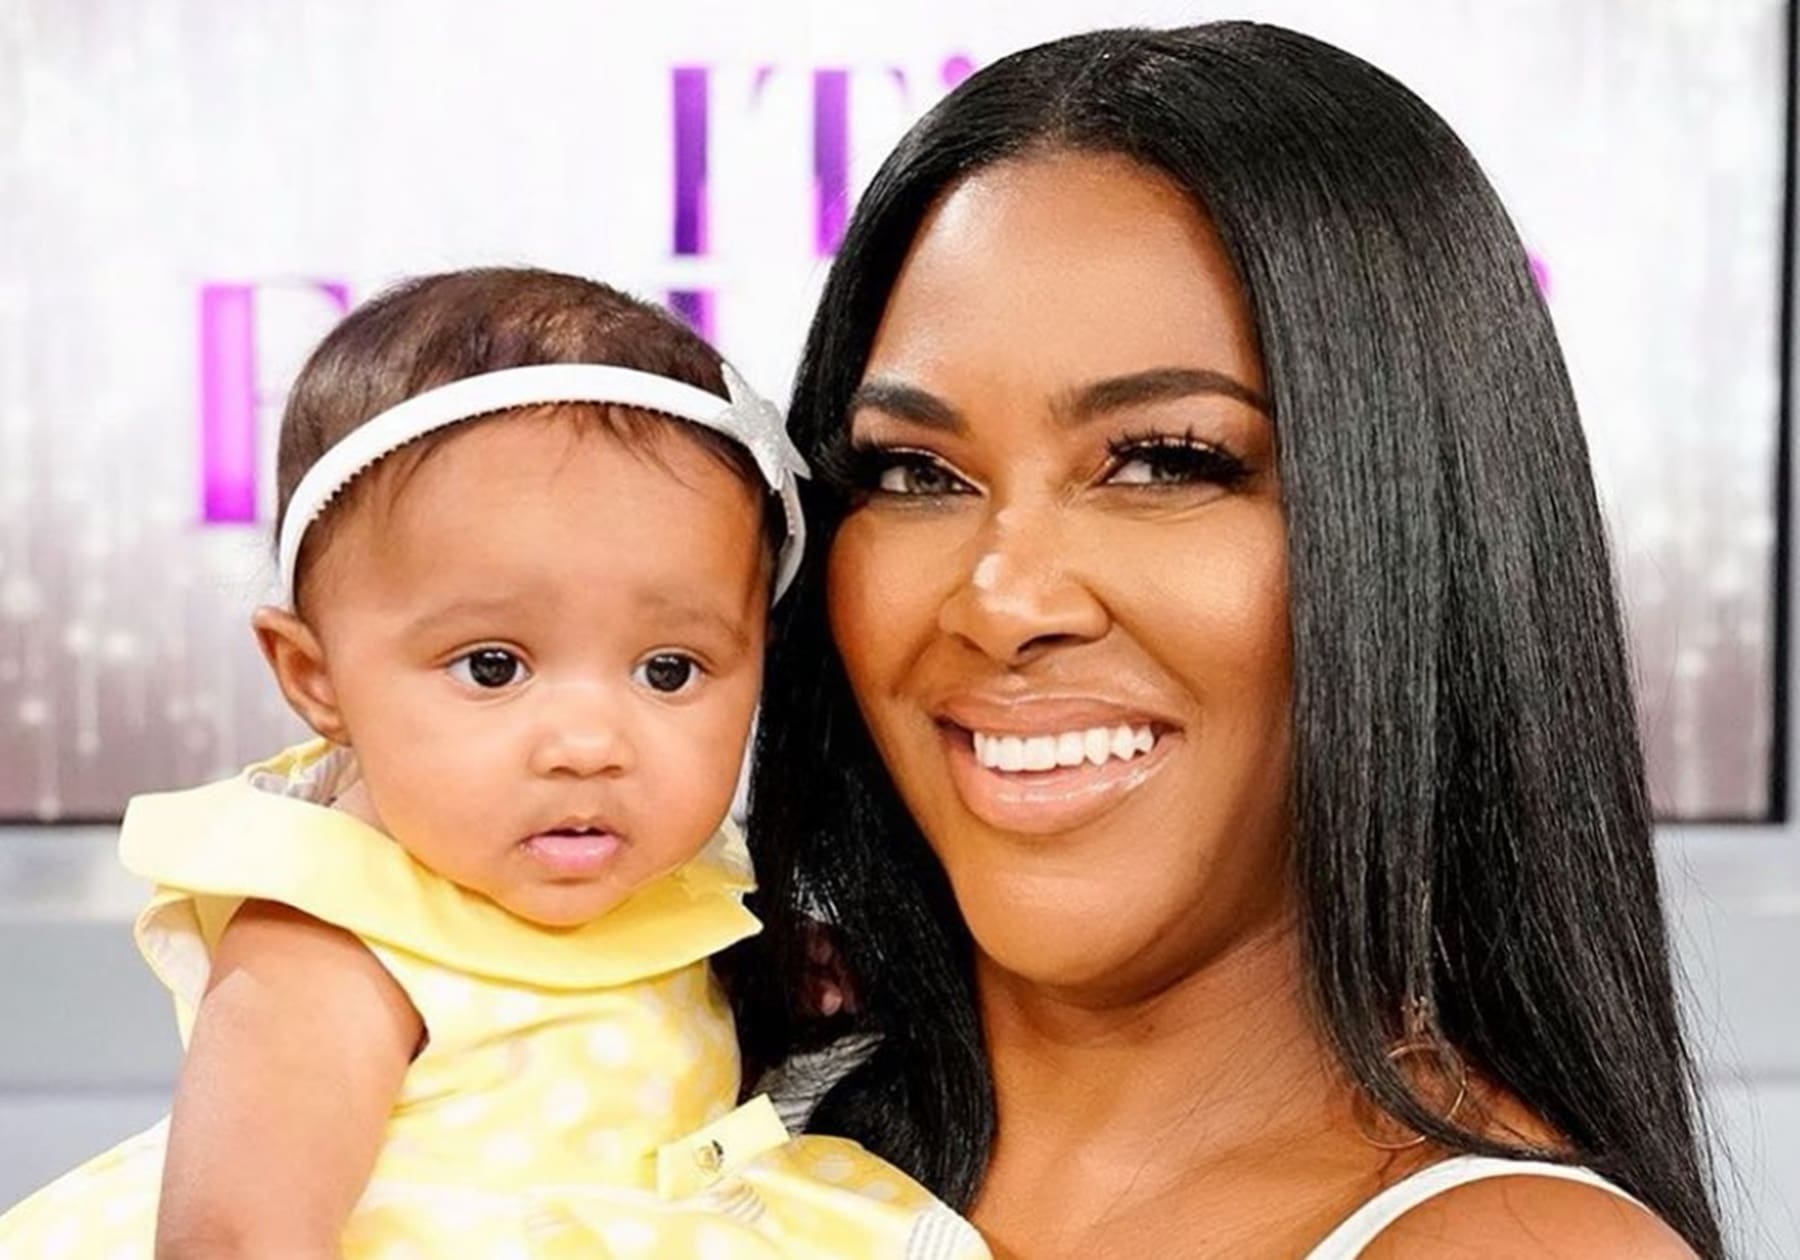 Kenya Moore's Baby Girl, Brooklyn Daly Is Highly Entertaining In Her Latest Video - She Can Even Sit Up!